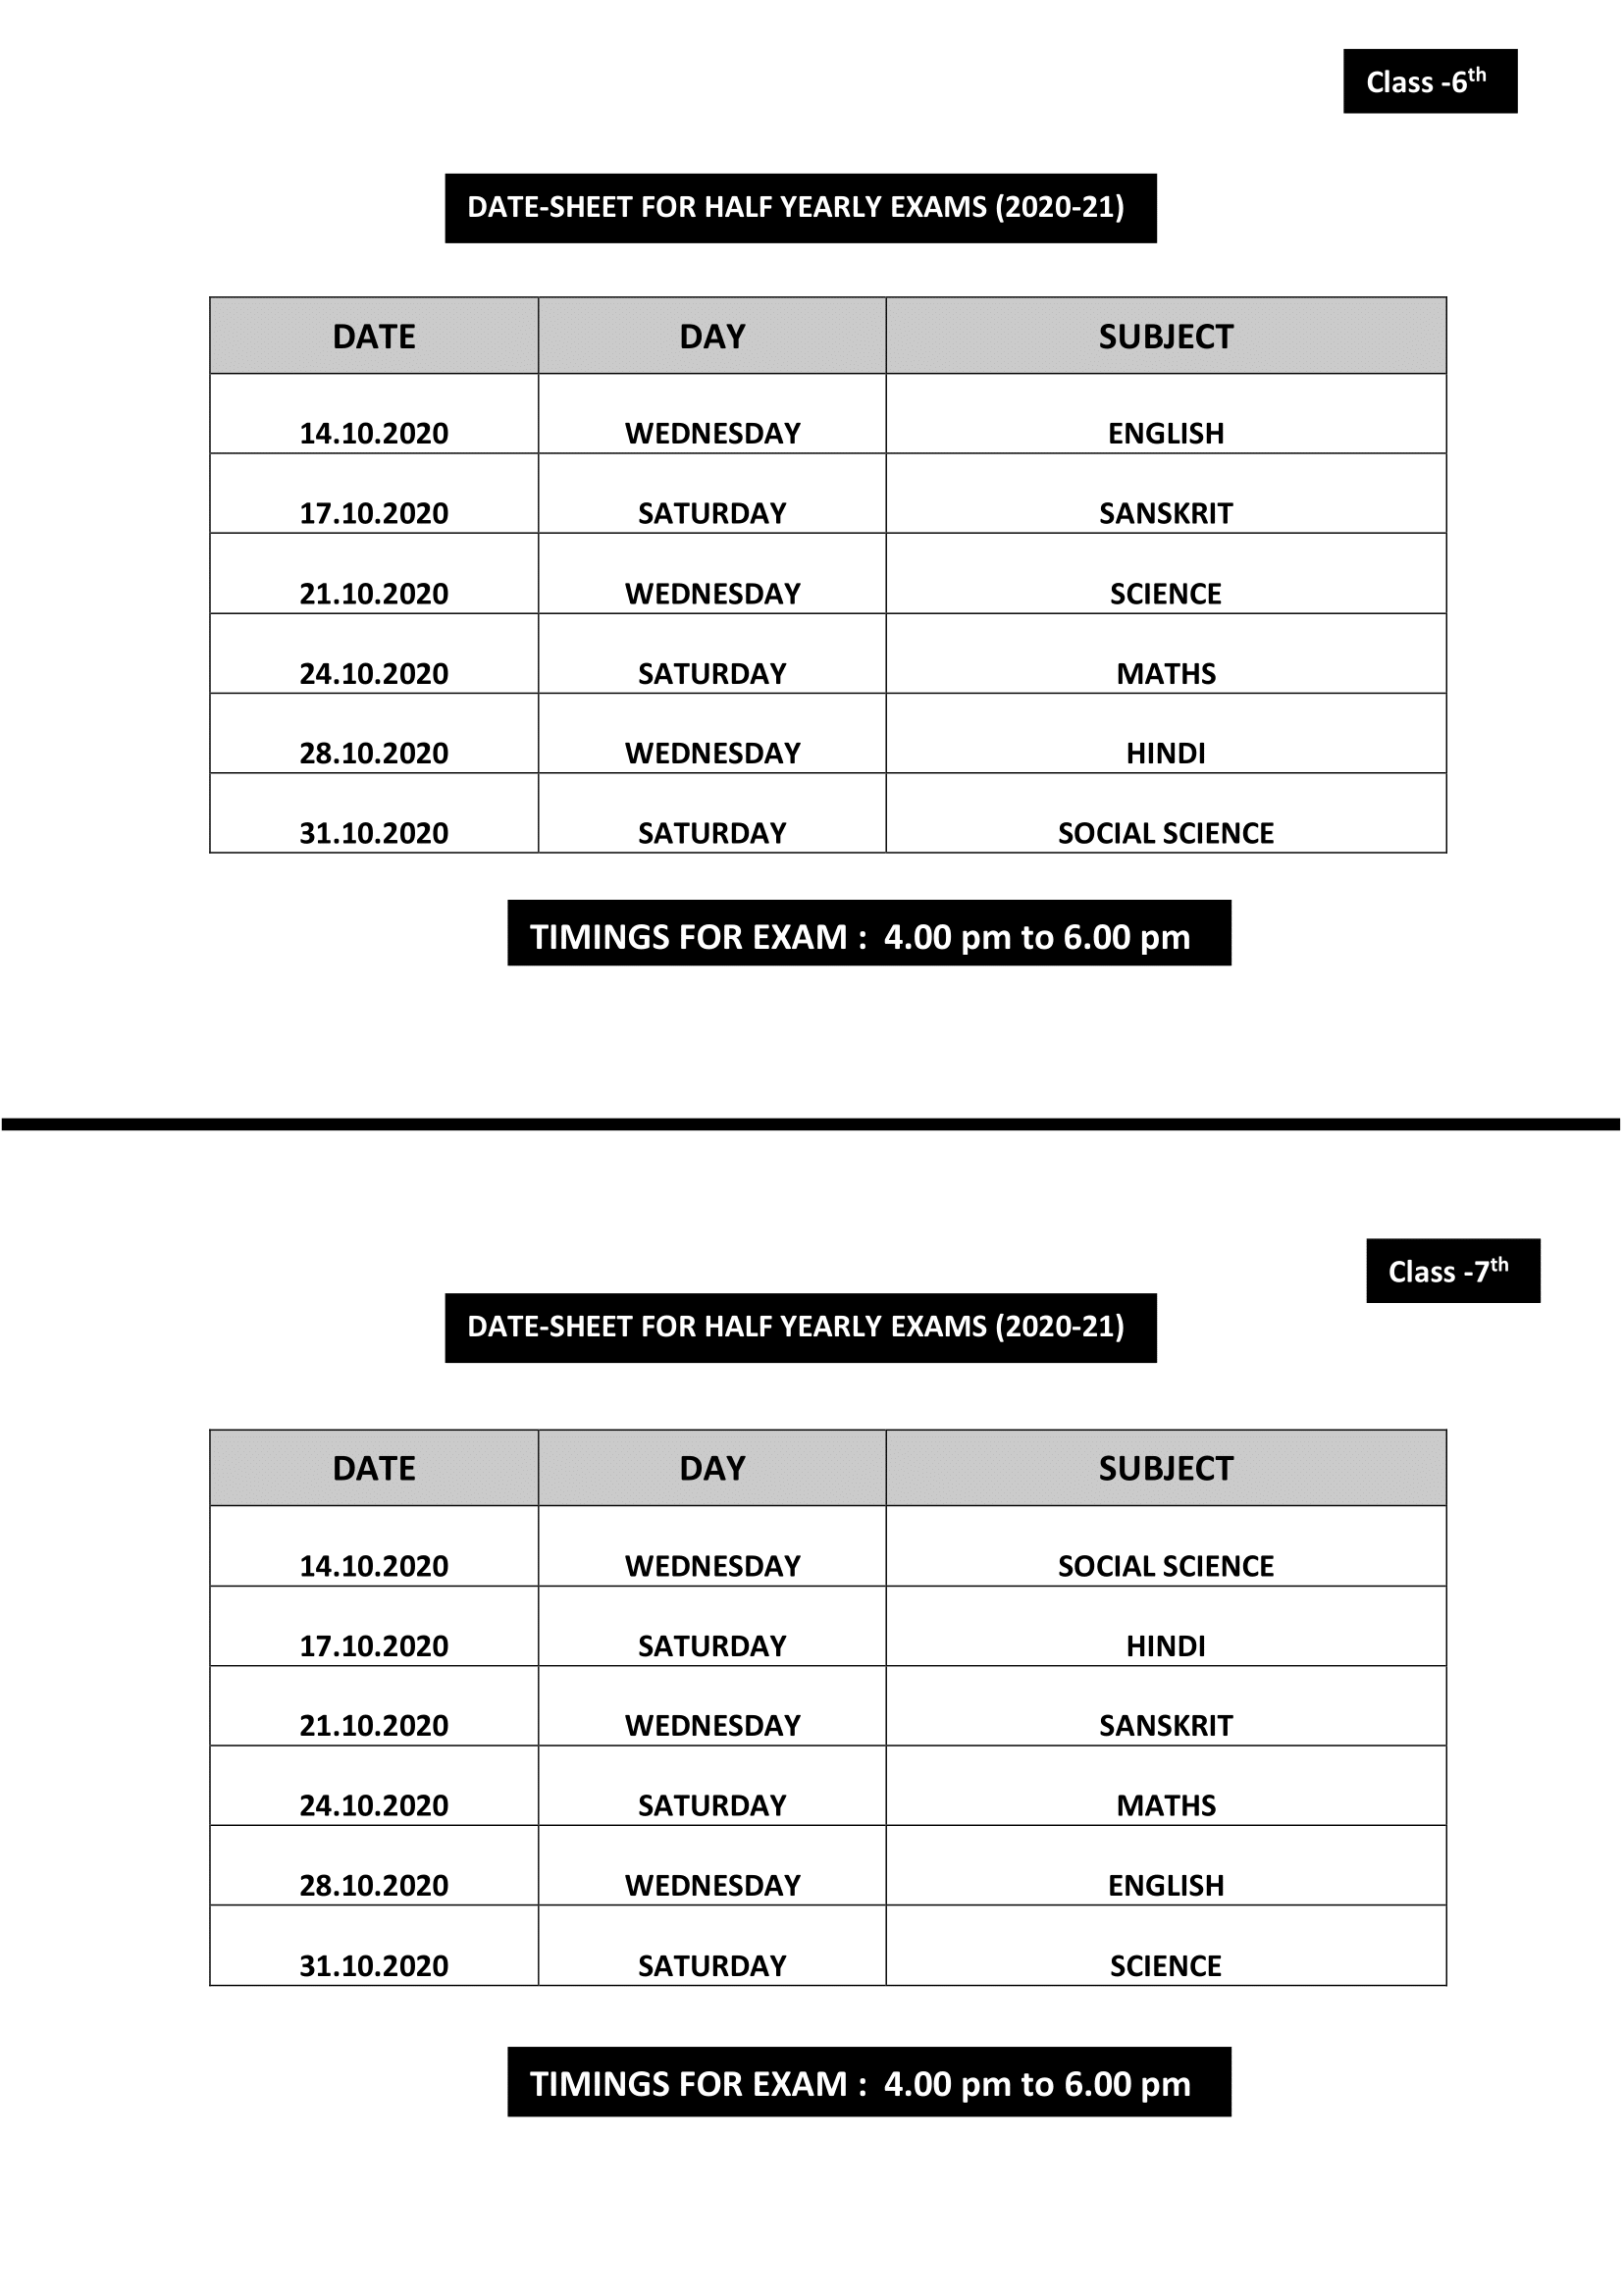 DATE-SHEET FOR HALF YEARLY EXAMS